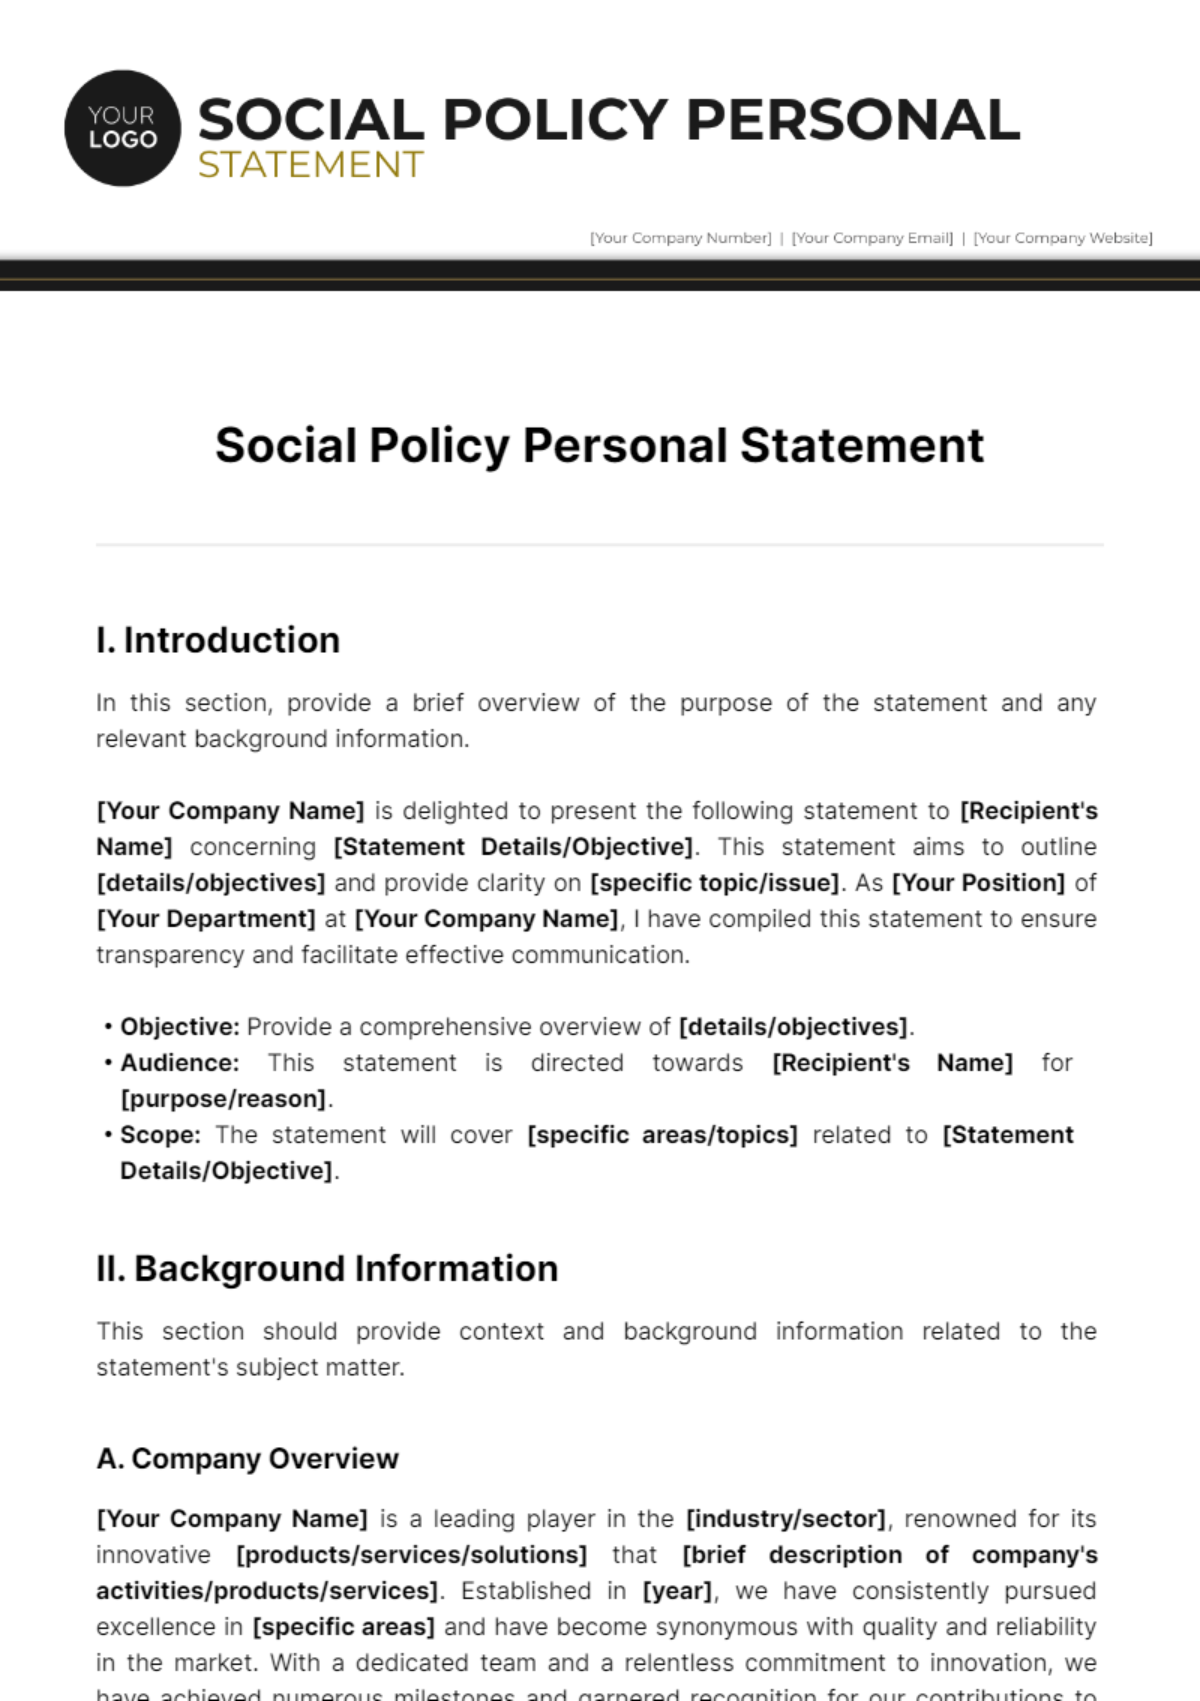 Social Policy Personal Statement Template